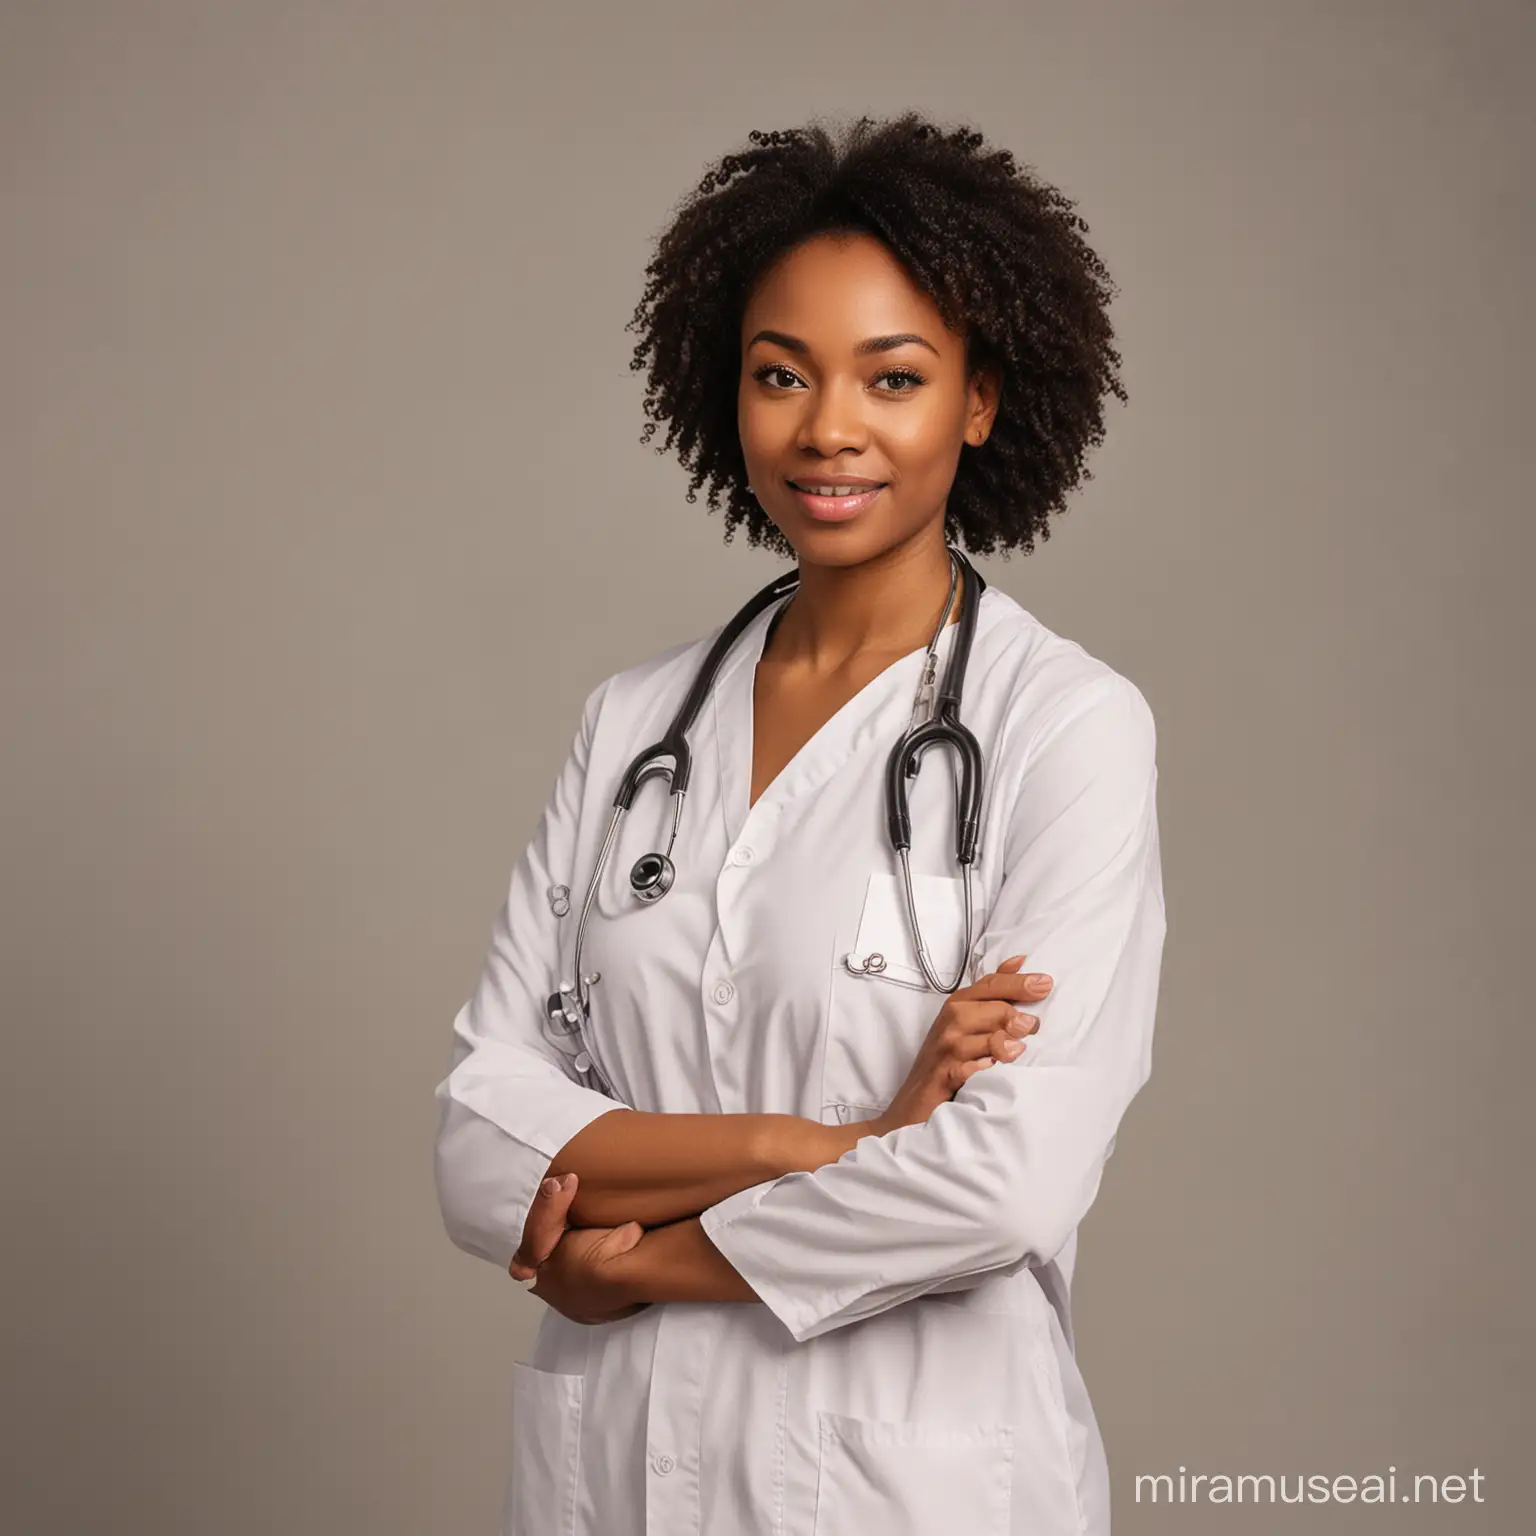 African American Doctor Standing with Stethoscope in Hospital Setting